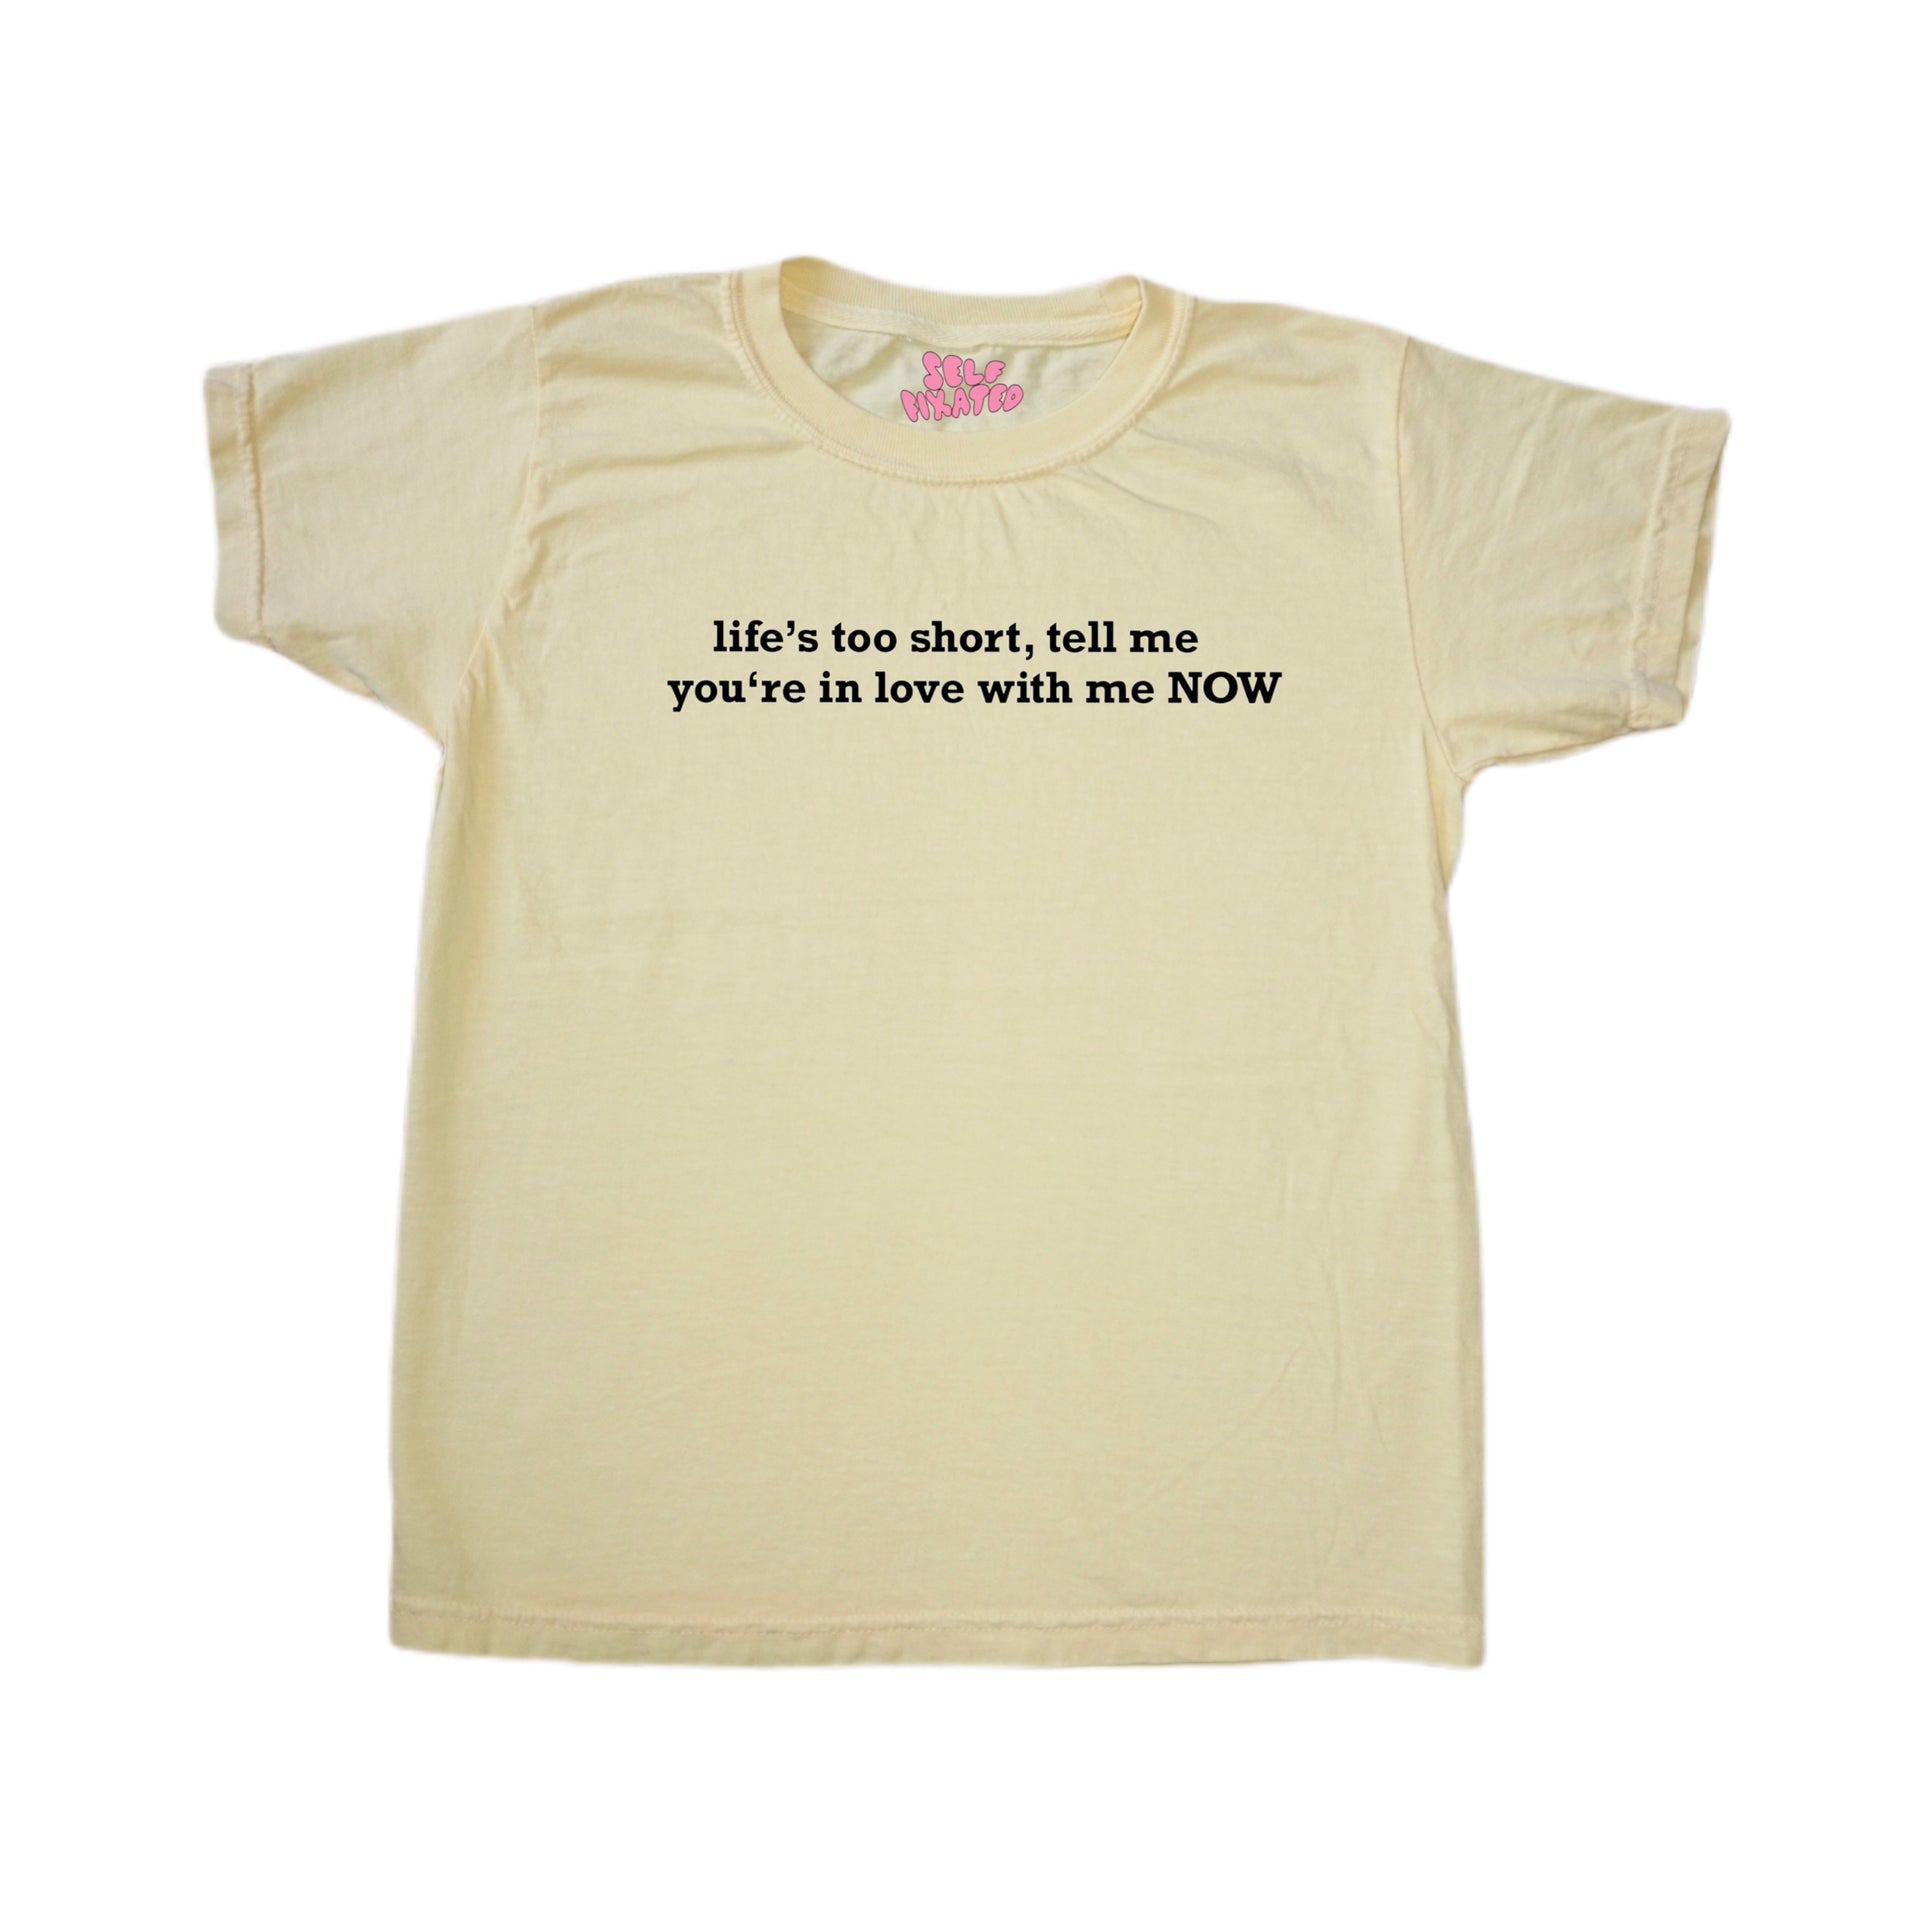 Life's too short tell me you're in love me now baby tee